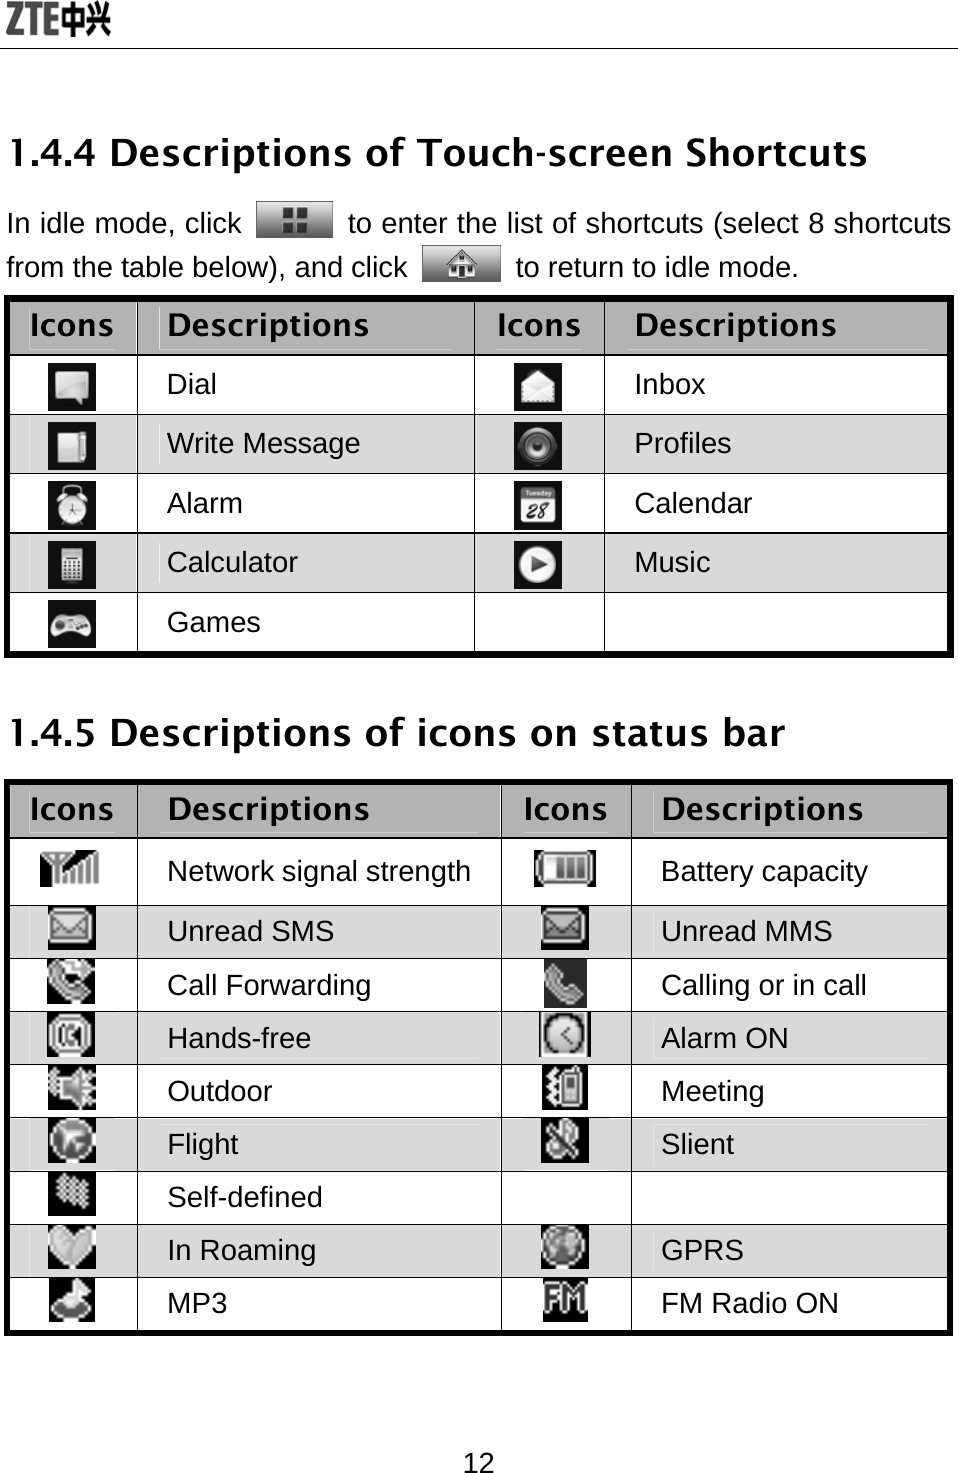  12 1.4.4 Descriptions of Touch-screen Shortcuts   In idle mode, click   to enter the list of shortcuts (select 8 shortcuts from the table below), and click   to return to idle mode.   Icons Descriptions Icons Descriptions  Dial   Inbox  Write Message   Profiles  Alarm   Calendar  Calculator   Music  Games    1.4.5 Descriptions of icons on status bar Icons Descriptions Icons Descriptions  Network signal strength  Battery capacity  Unread SMS  Unread MMS  Call Forwarding  Calling or in call  Hands-free   Alarm ON  Outdoor   Meeting  Flight   Slient  Self-defined     In Roaming   GPRS   MP3    FM Radio ON 